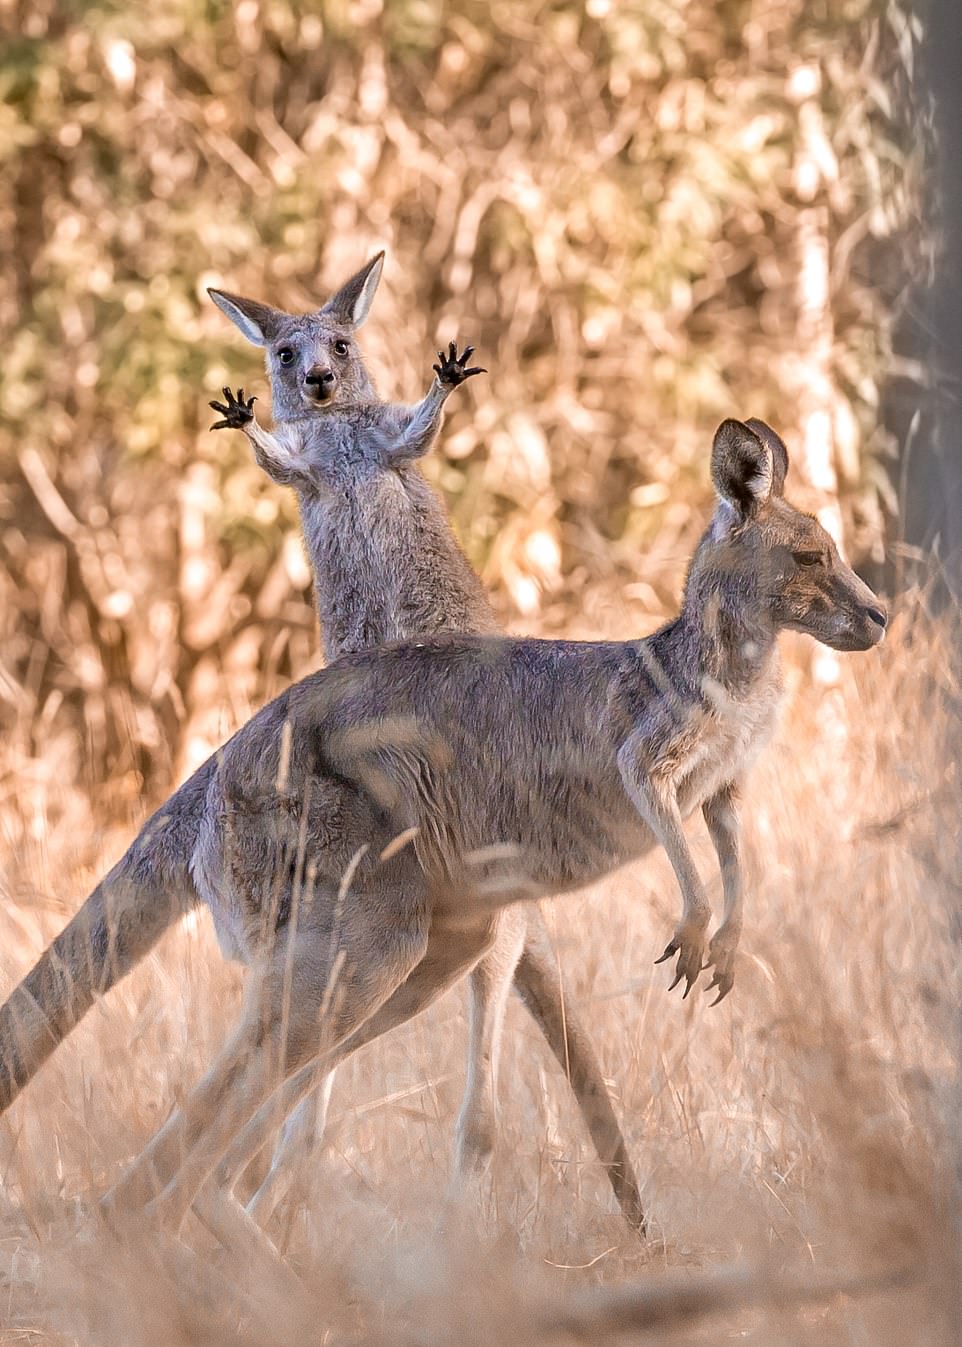 Boing! by Lara Mathews from Melbourne, Australia: 'Taken at Westerfolds Park, a beautiful and surprisingly wild pocket of land in the eastern suburbs of Melbourne, famous for its kangaroo population. The mob was enjoying some morning sunshine when this joey decided to get silly and try his hand at boxing'